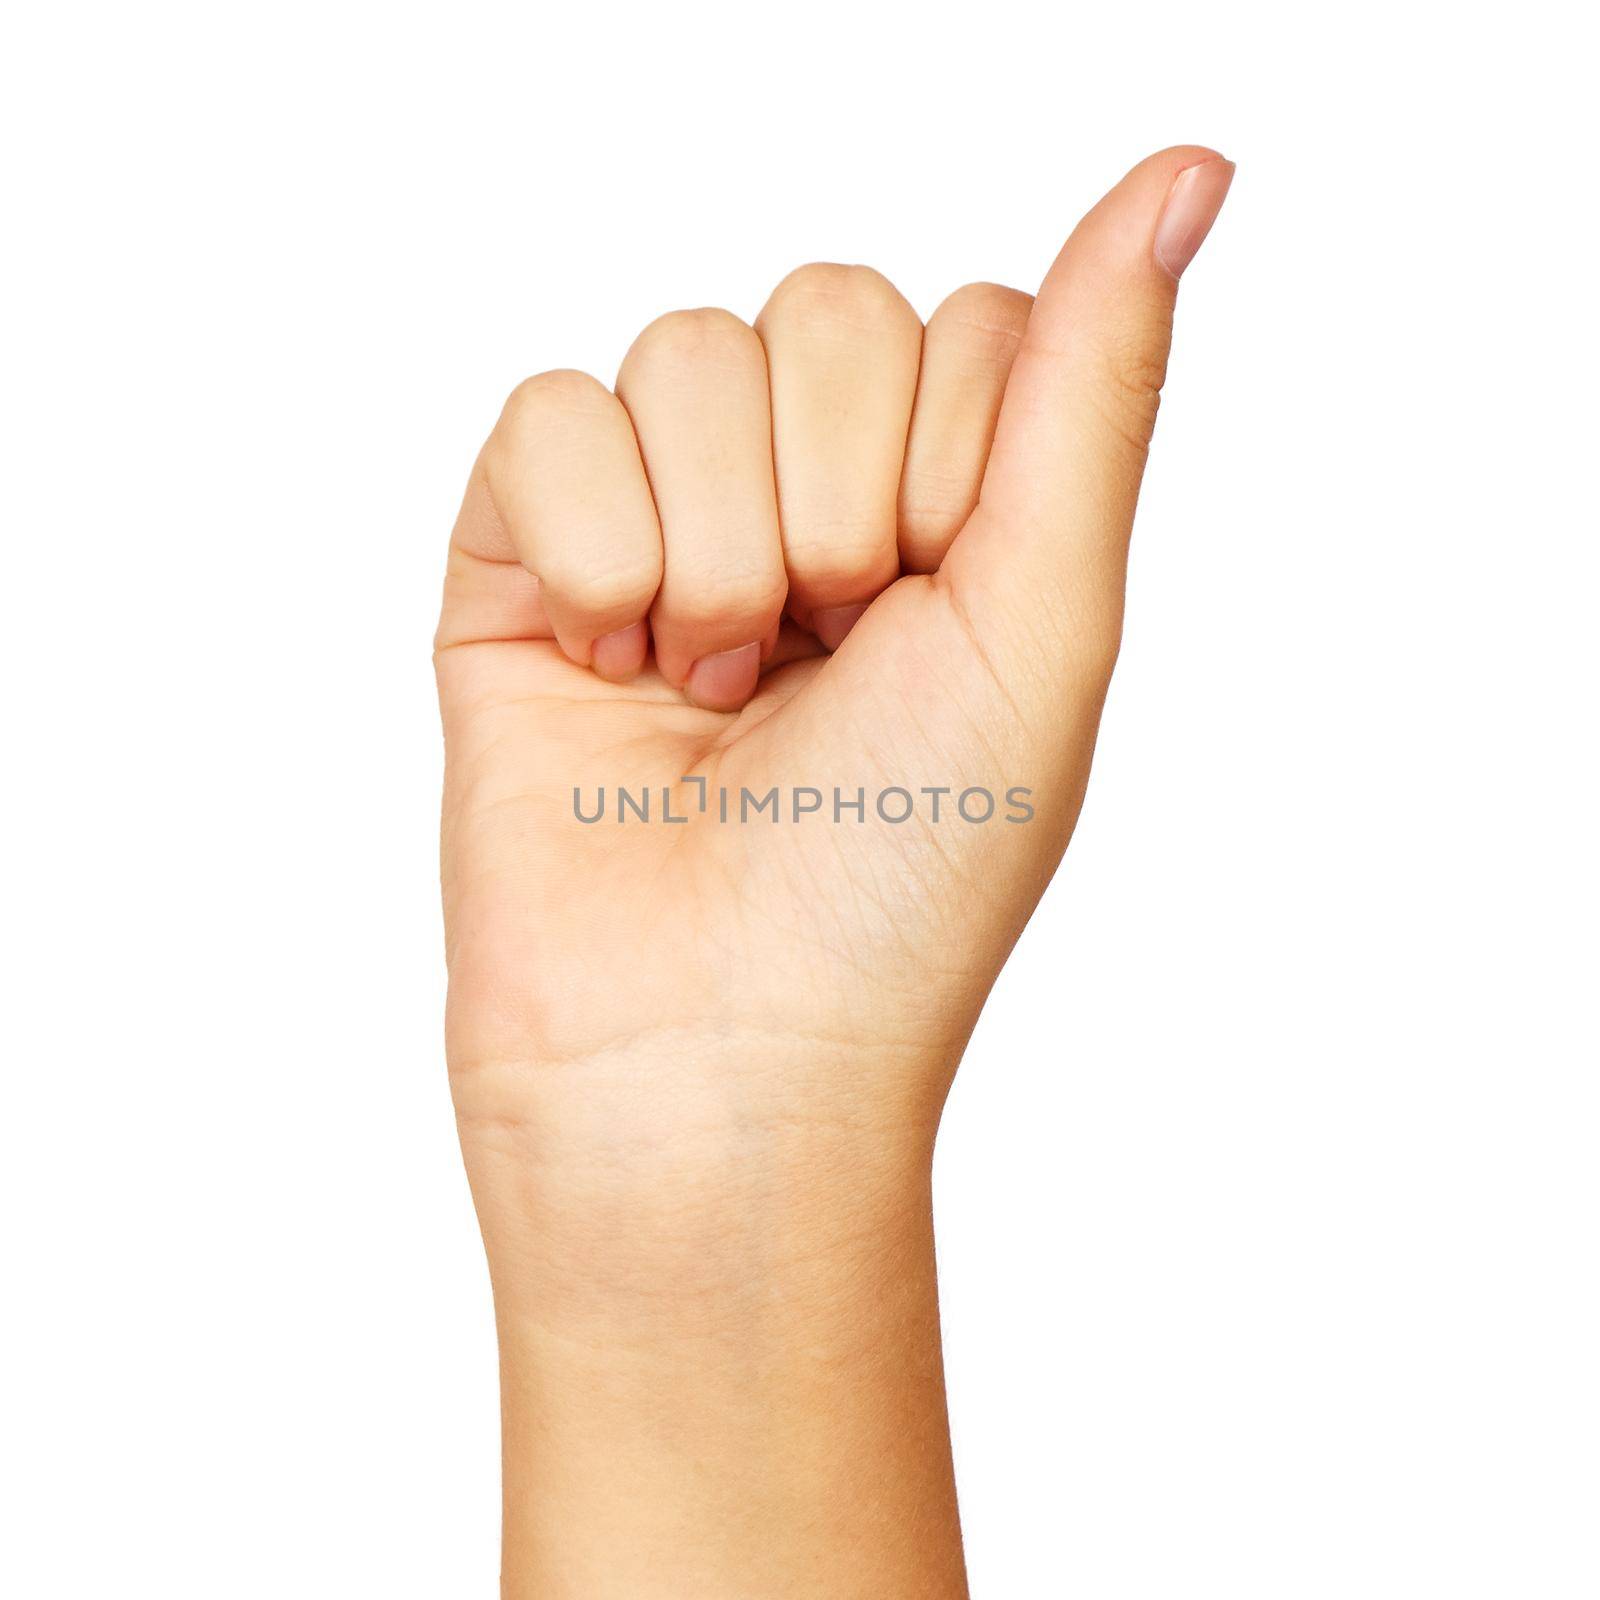 american sign language. female hand showing letter a by raddnatt